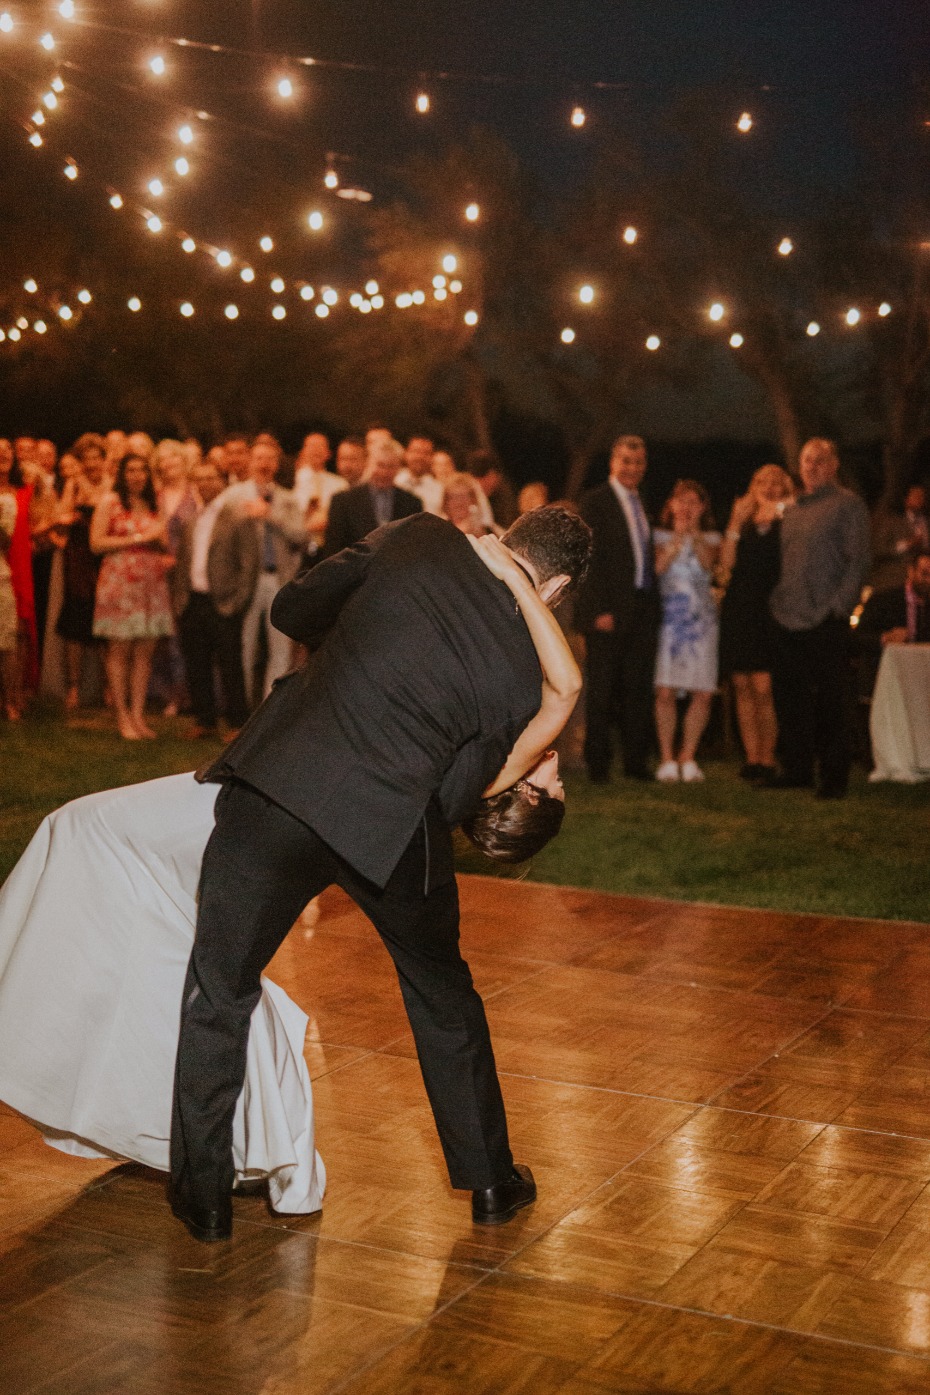 First dance under twinkle lights